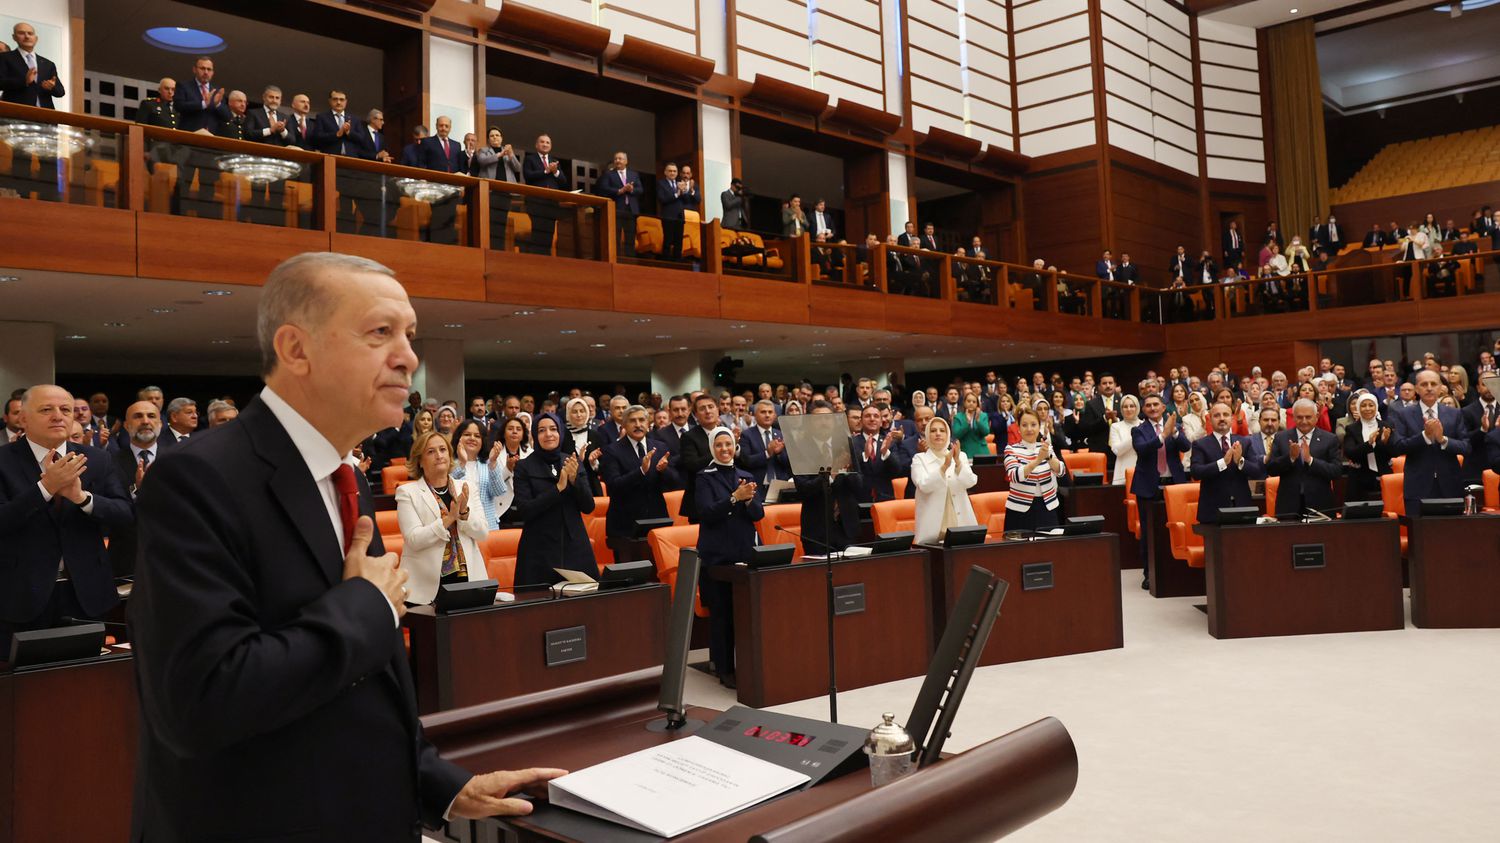 NATO: Recep Tayyip Erdogan threatens again to block the membership of Sweden and Finland
